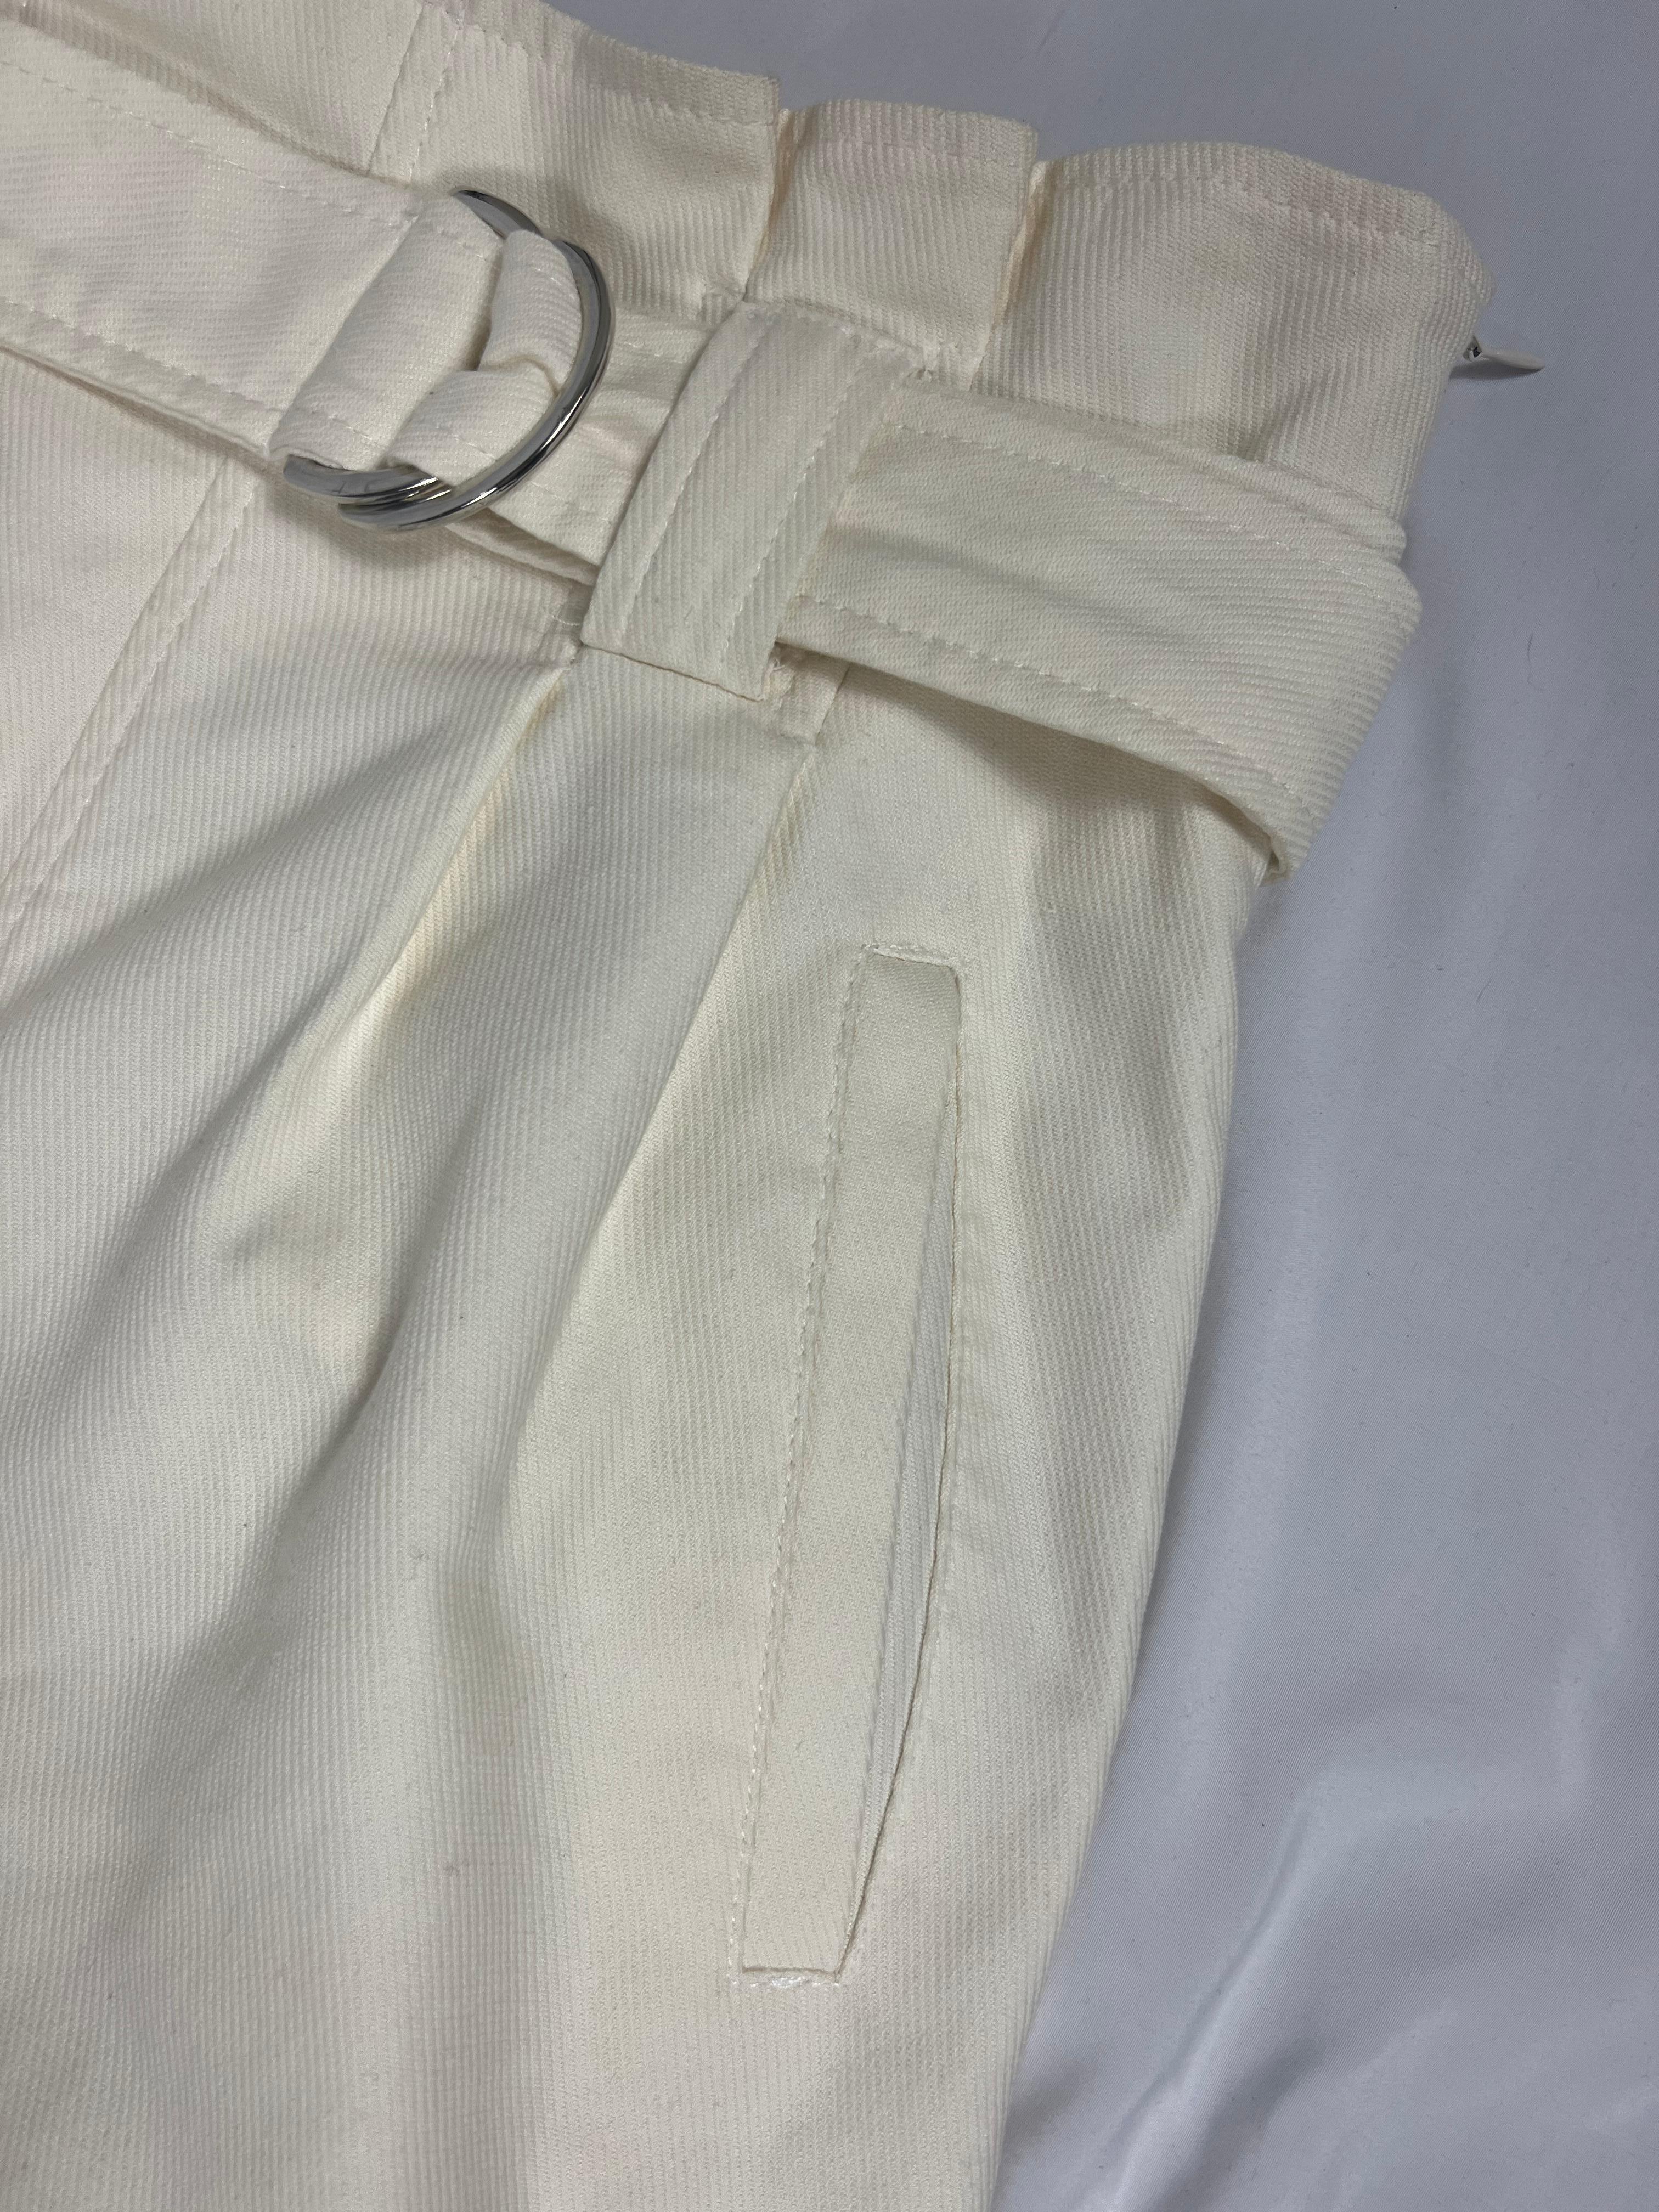 Gianni White Denim Jeans Pants, Size 36

- High waisted
- Belted
- Pocket on each sides
- Straight leg fit
- Silver tone belt buckle
- Concealed side zip closure 
- Off white color
- Cotton, Polyester, Elastane 
- Made in Italy 